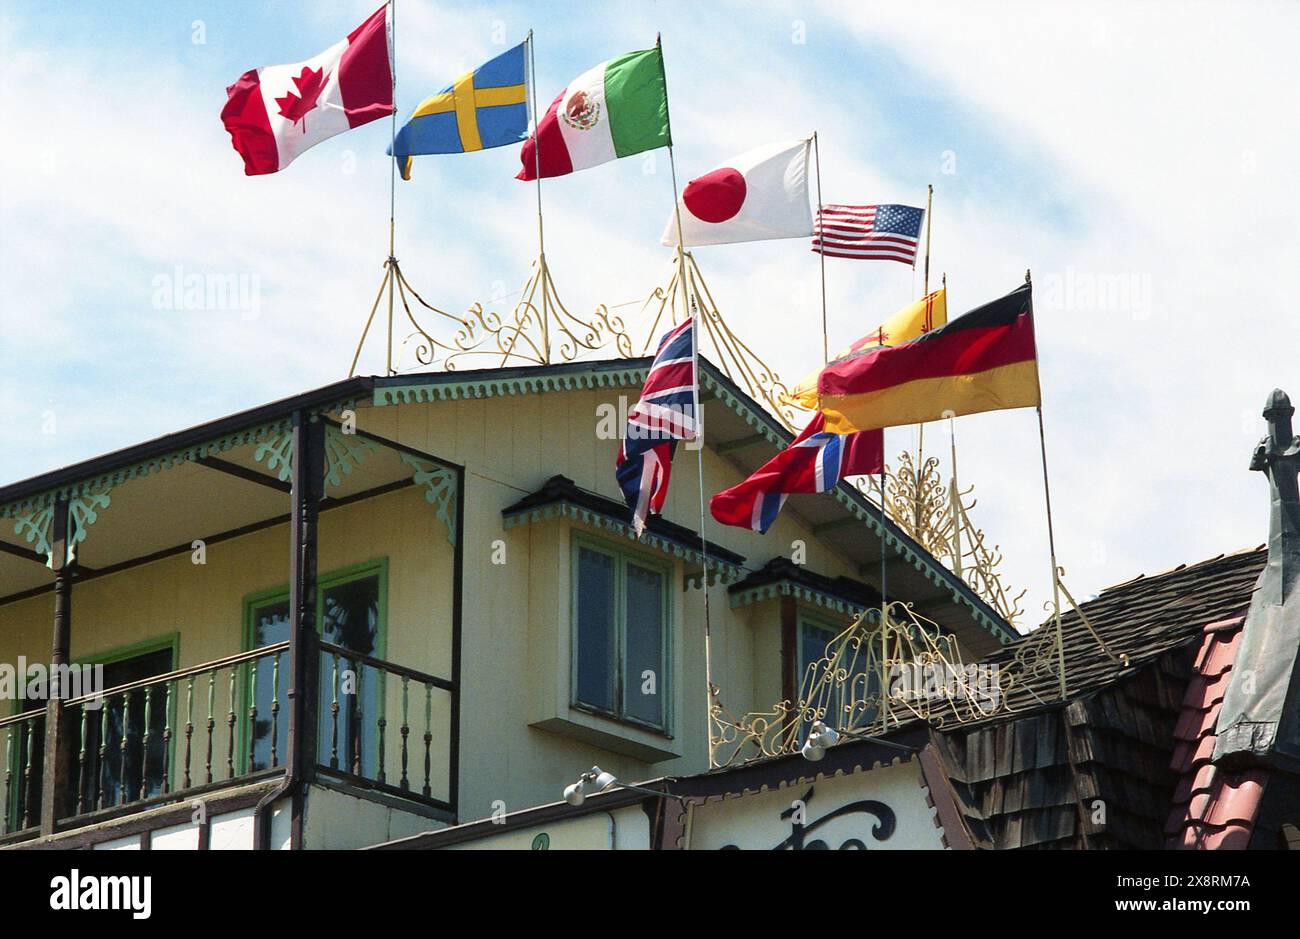 Colorado, U.S.A., approx. 1987. Exterior view of a local restaurant, with flags of different nations waving on top. Stock Photo